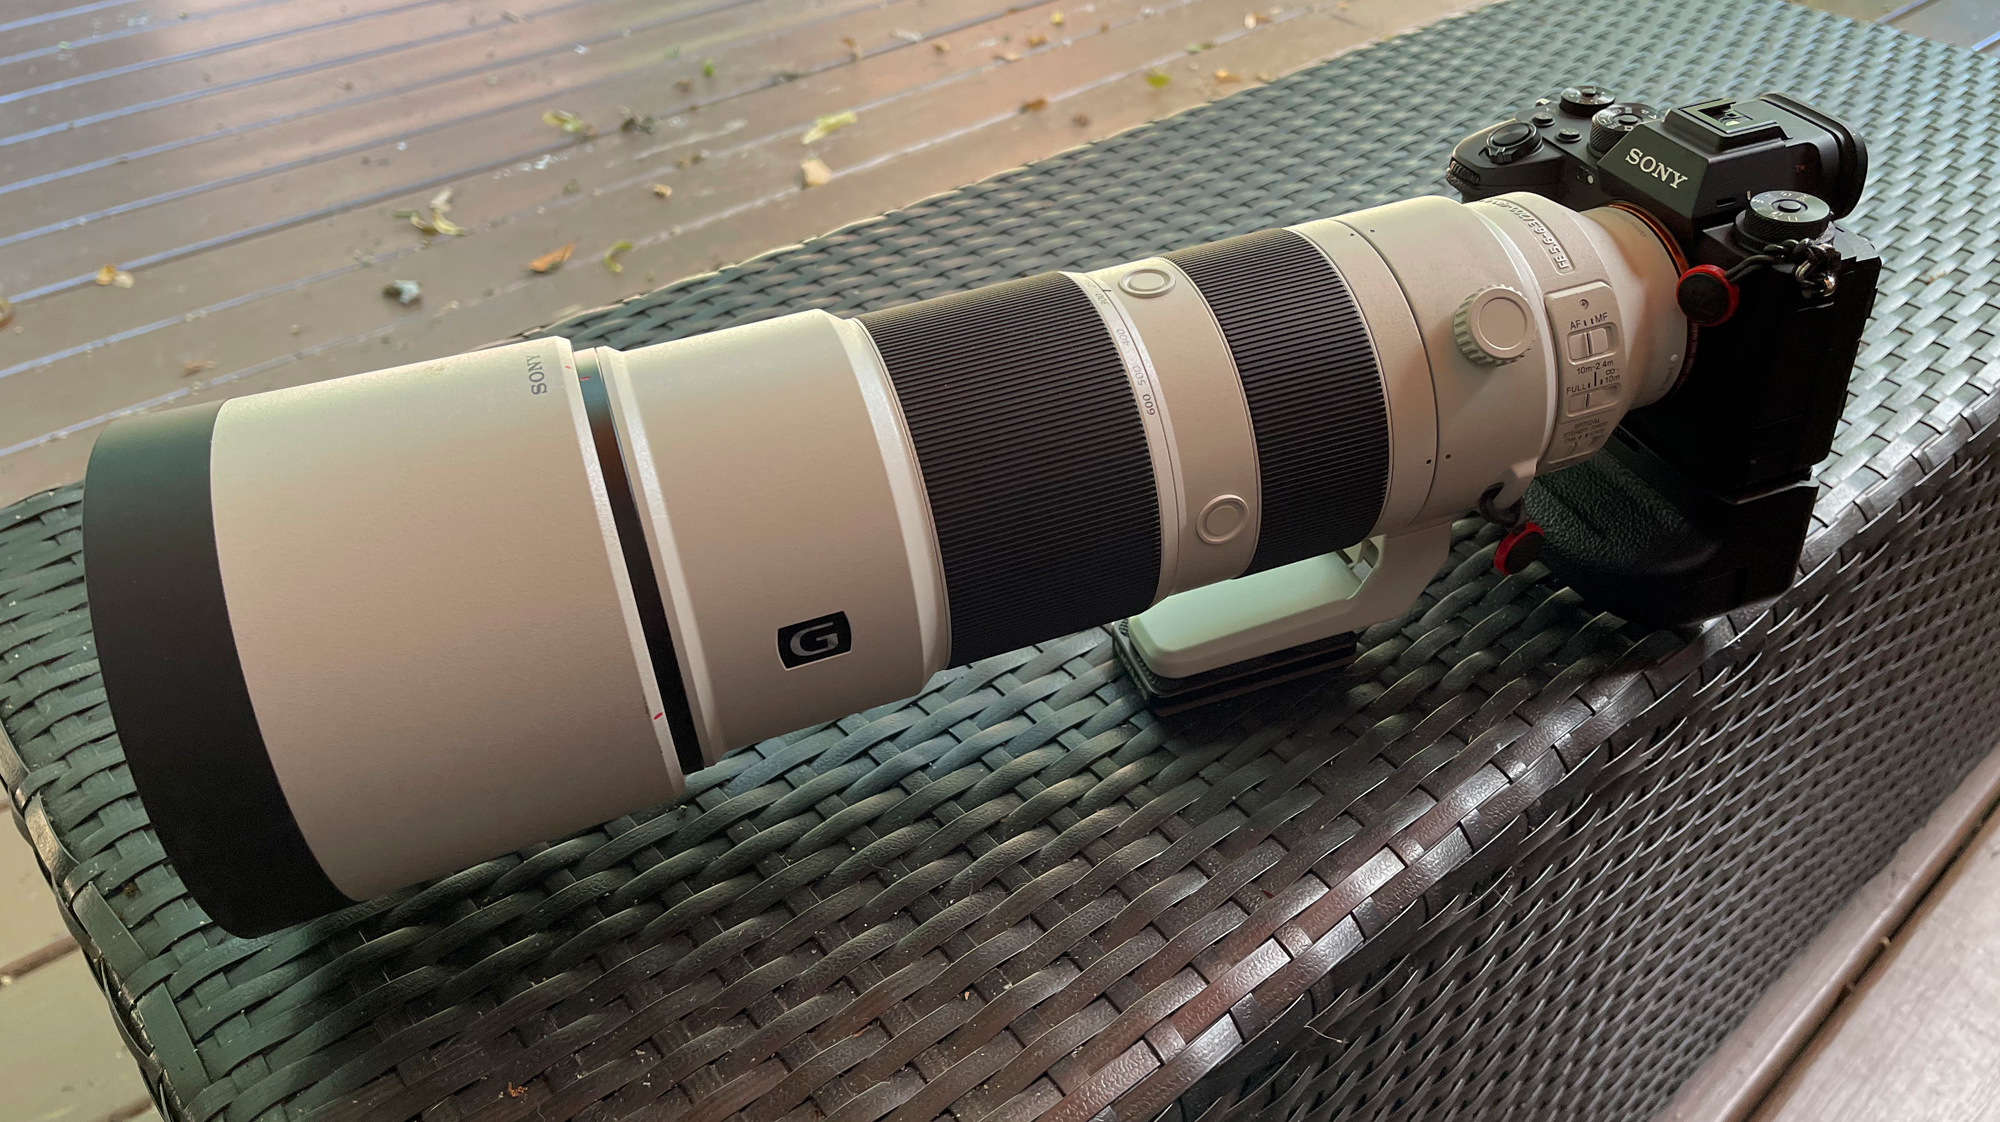 The Sony a1 with the 200-600mm G lens